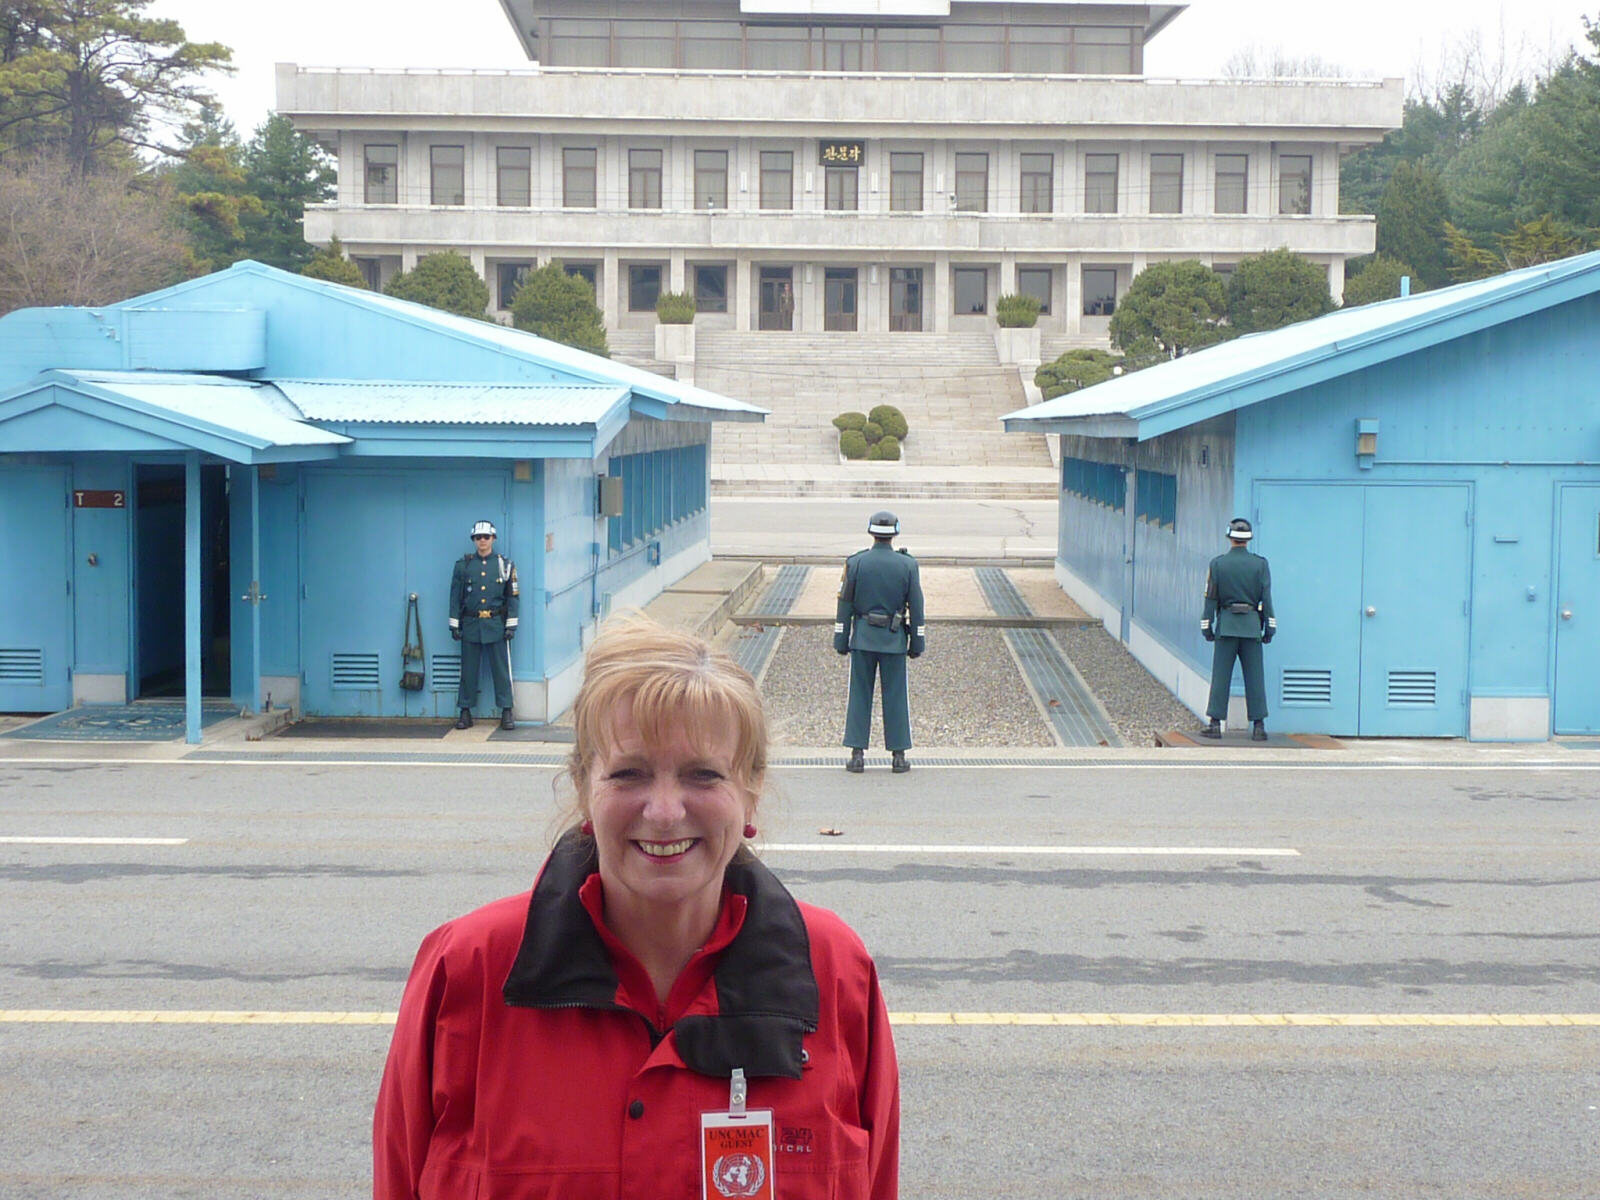 North and South Korea at Panmunjom Joint Security Area